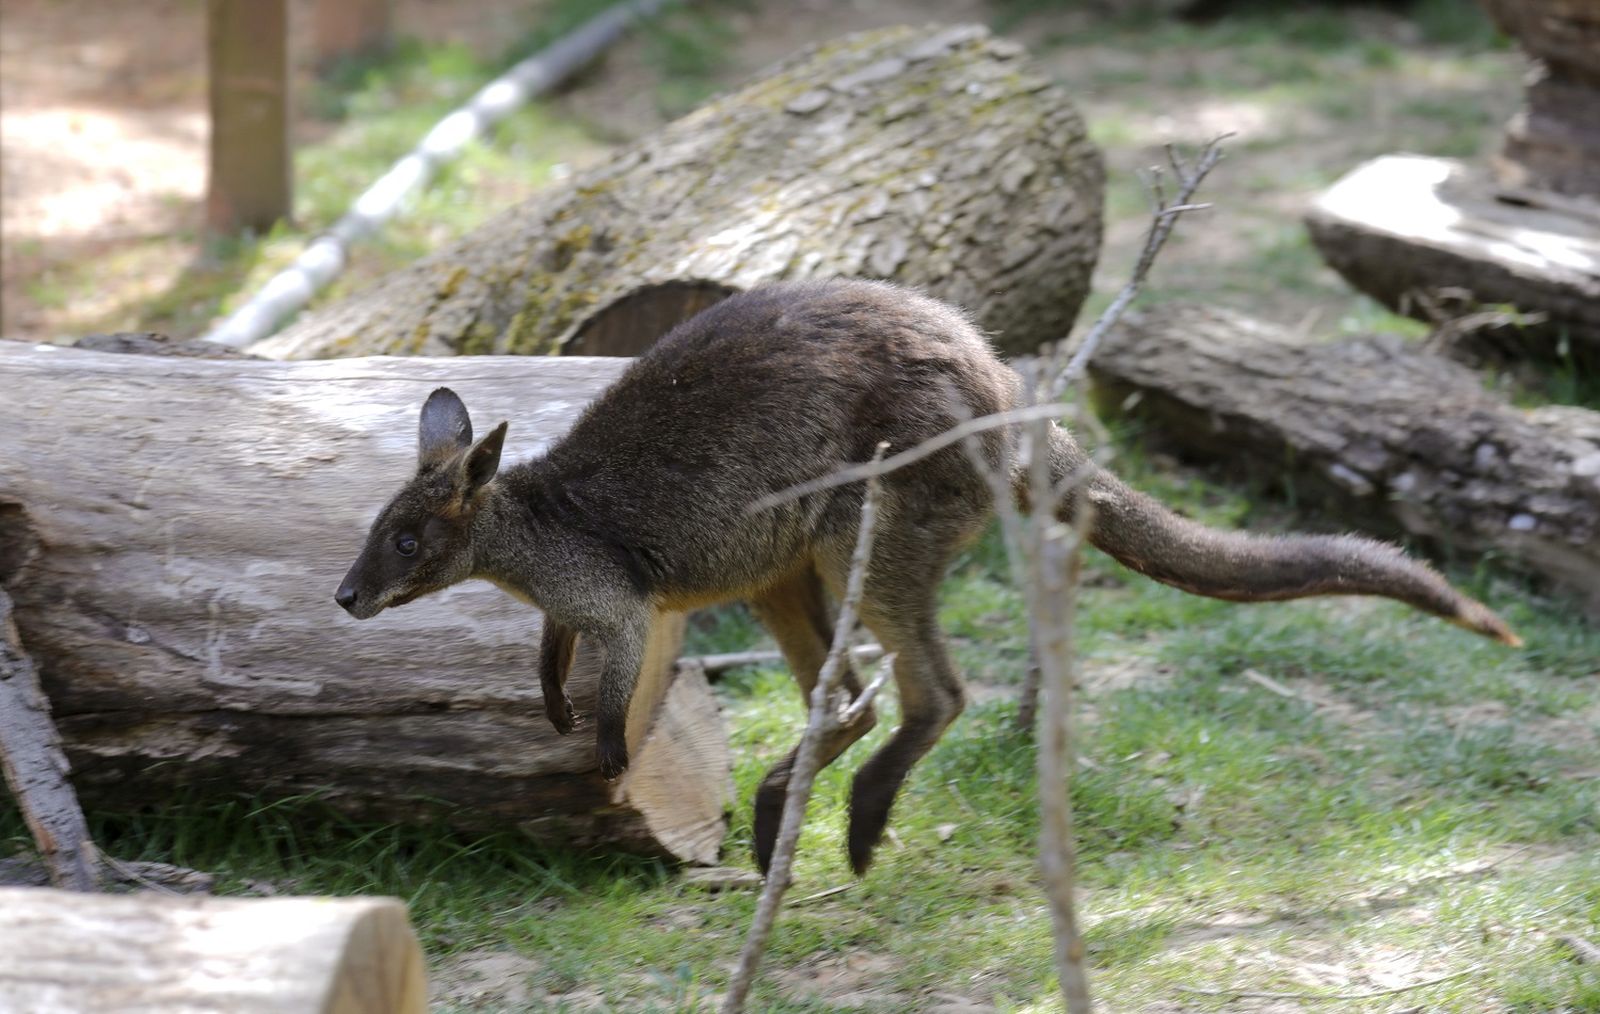 Kangaroo enjoys in empty ZagrebÕs Zoo during the 50th anniversary of World Earth Day in Zagreb, 22 April 2020. The wild animals enjoy without visitors in ZagrebÕs Zoo during the lockdown many activities caused by Coronavirus COVID-19.
EPA-EFE  ANTONIO BAT